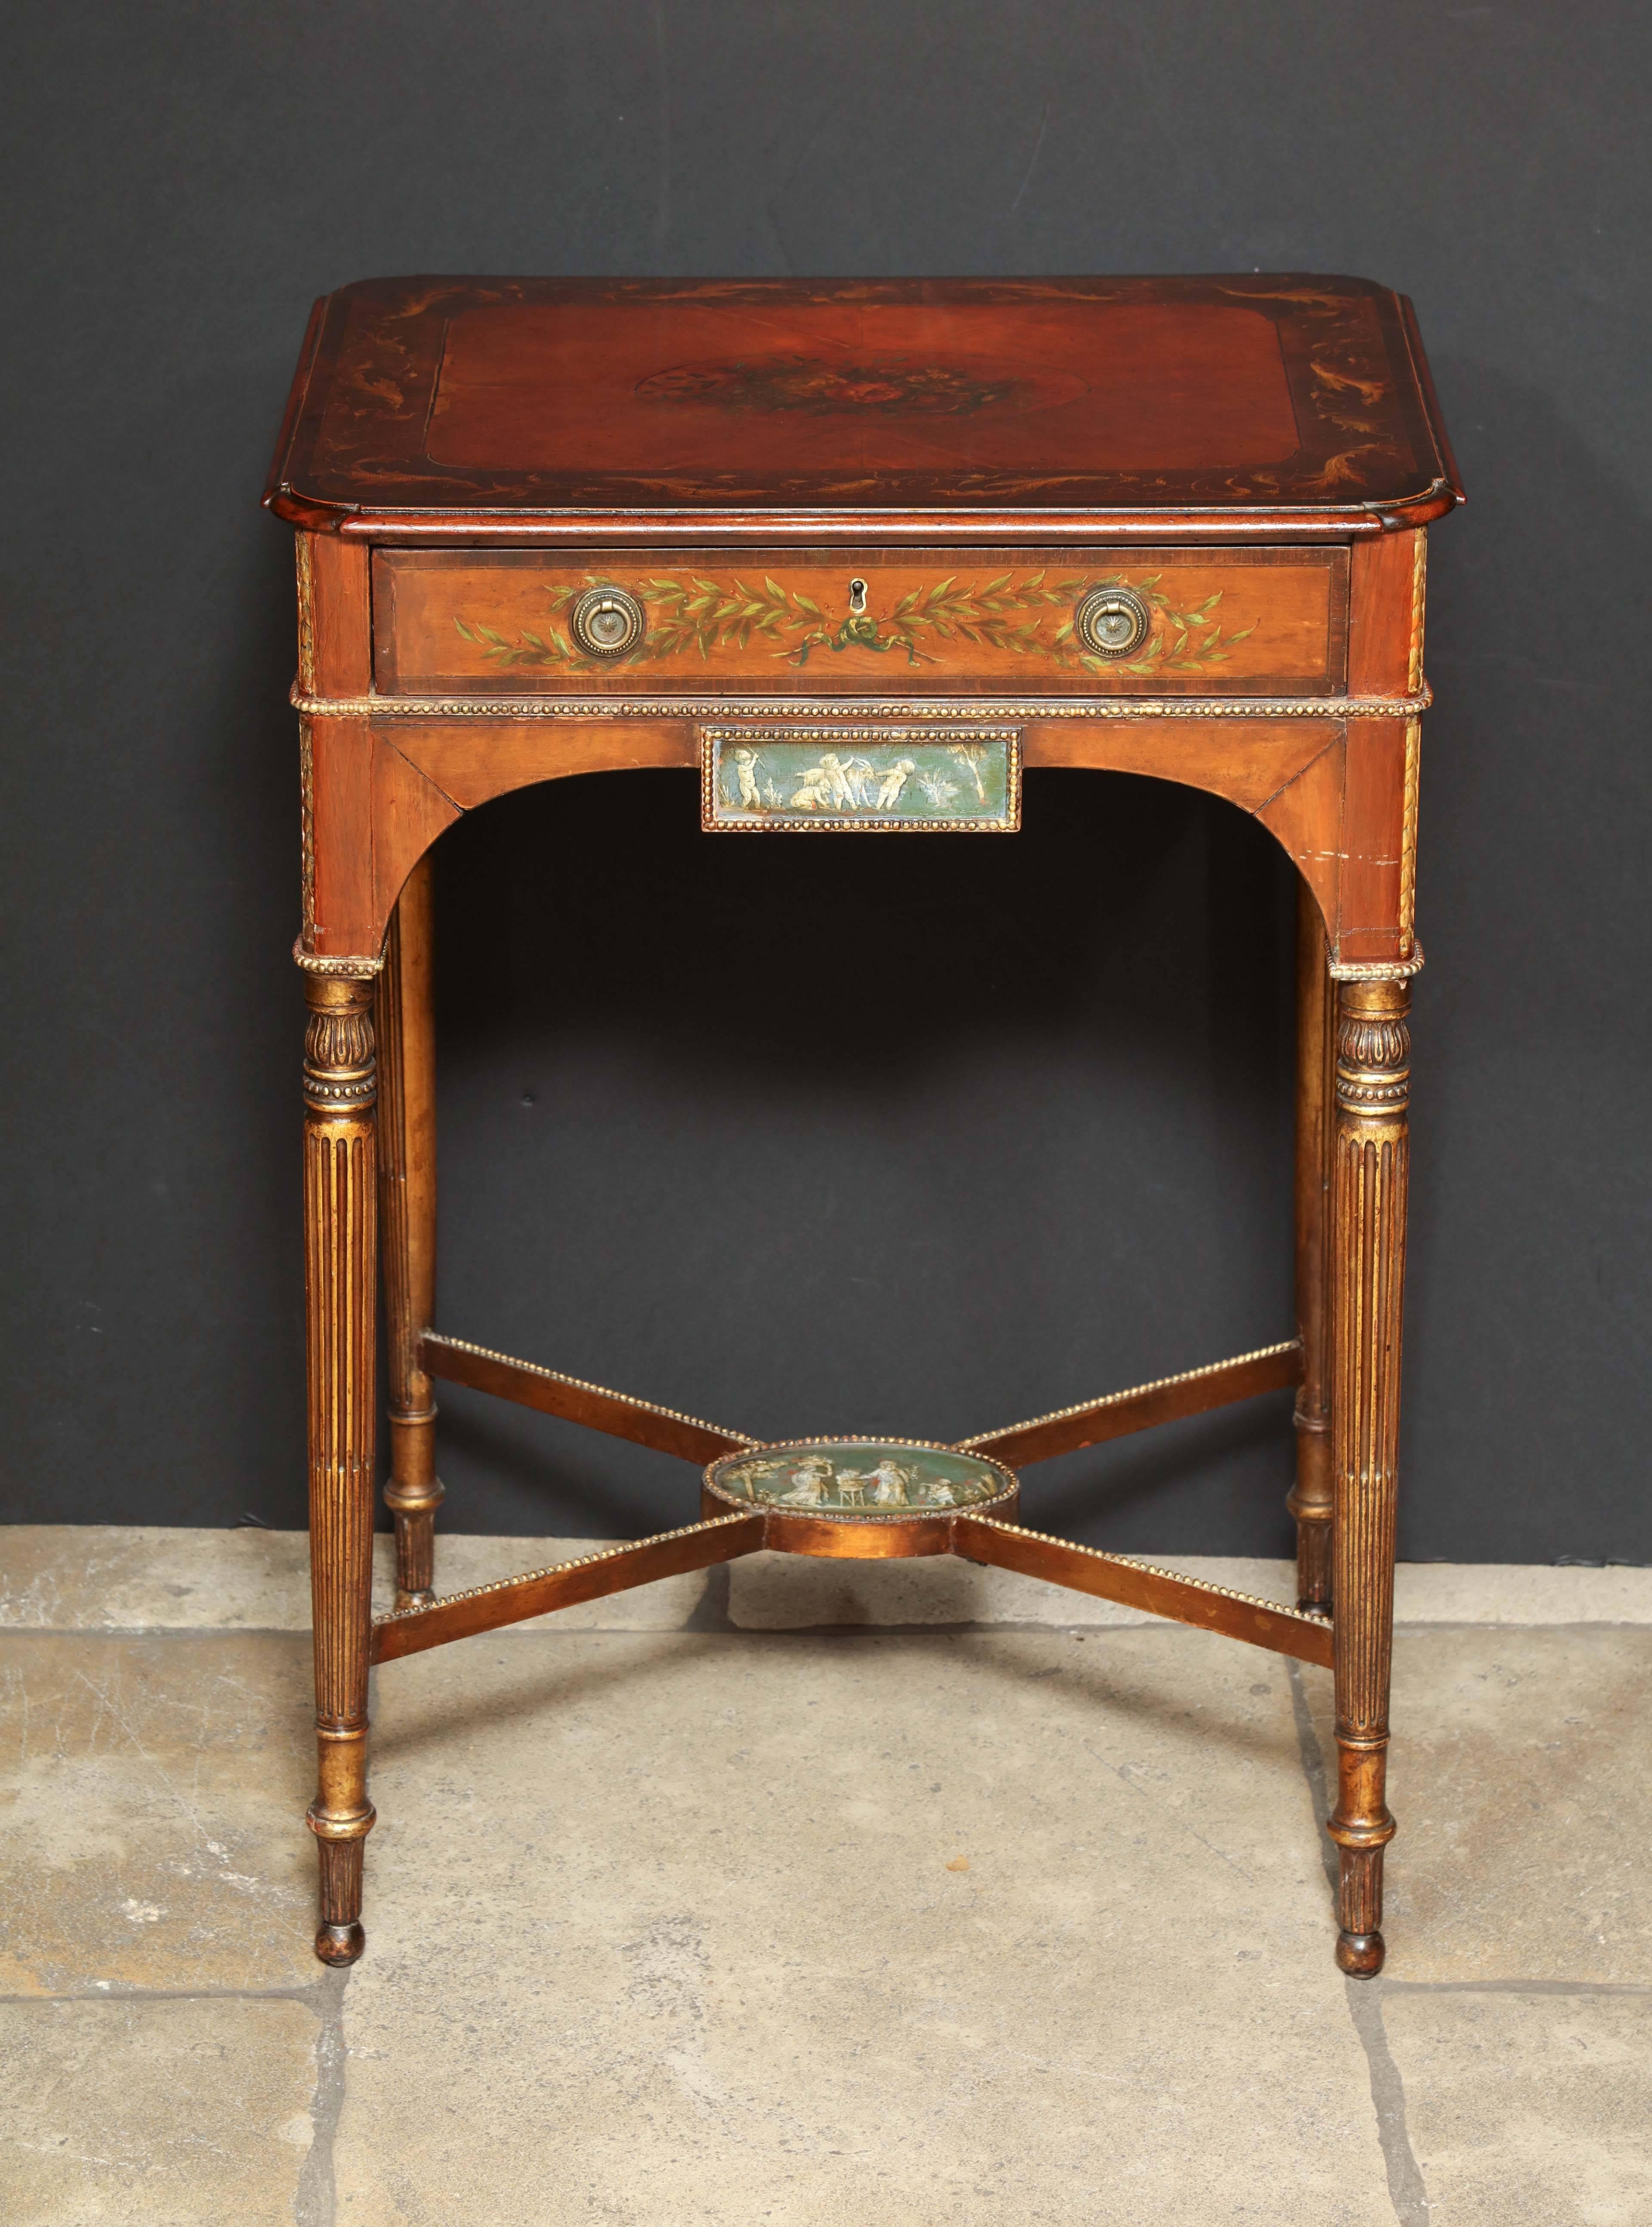 A rare George III satinwood and floral paint decorated side table with single drawer, faux marble painted panels, stop fluted legs and stretcher base.